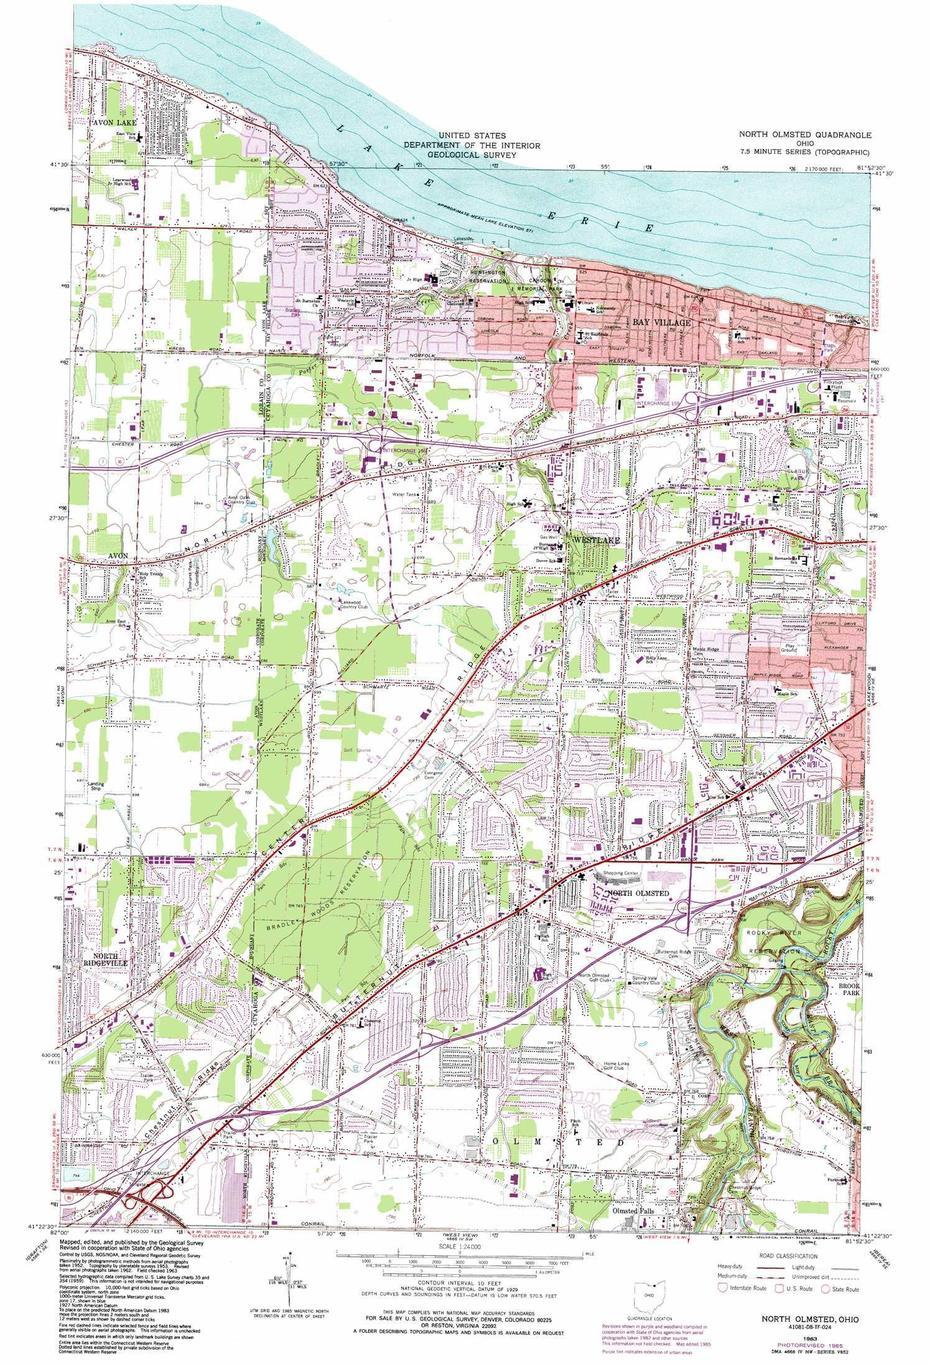 North Olmsted Topographic Map, Oh – Usgs Topo Quad 41081D8, North Olmsted, United States, Cambridge  Ohio, Olmsted Falls Ohio